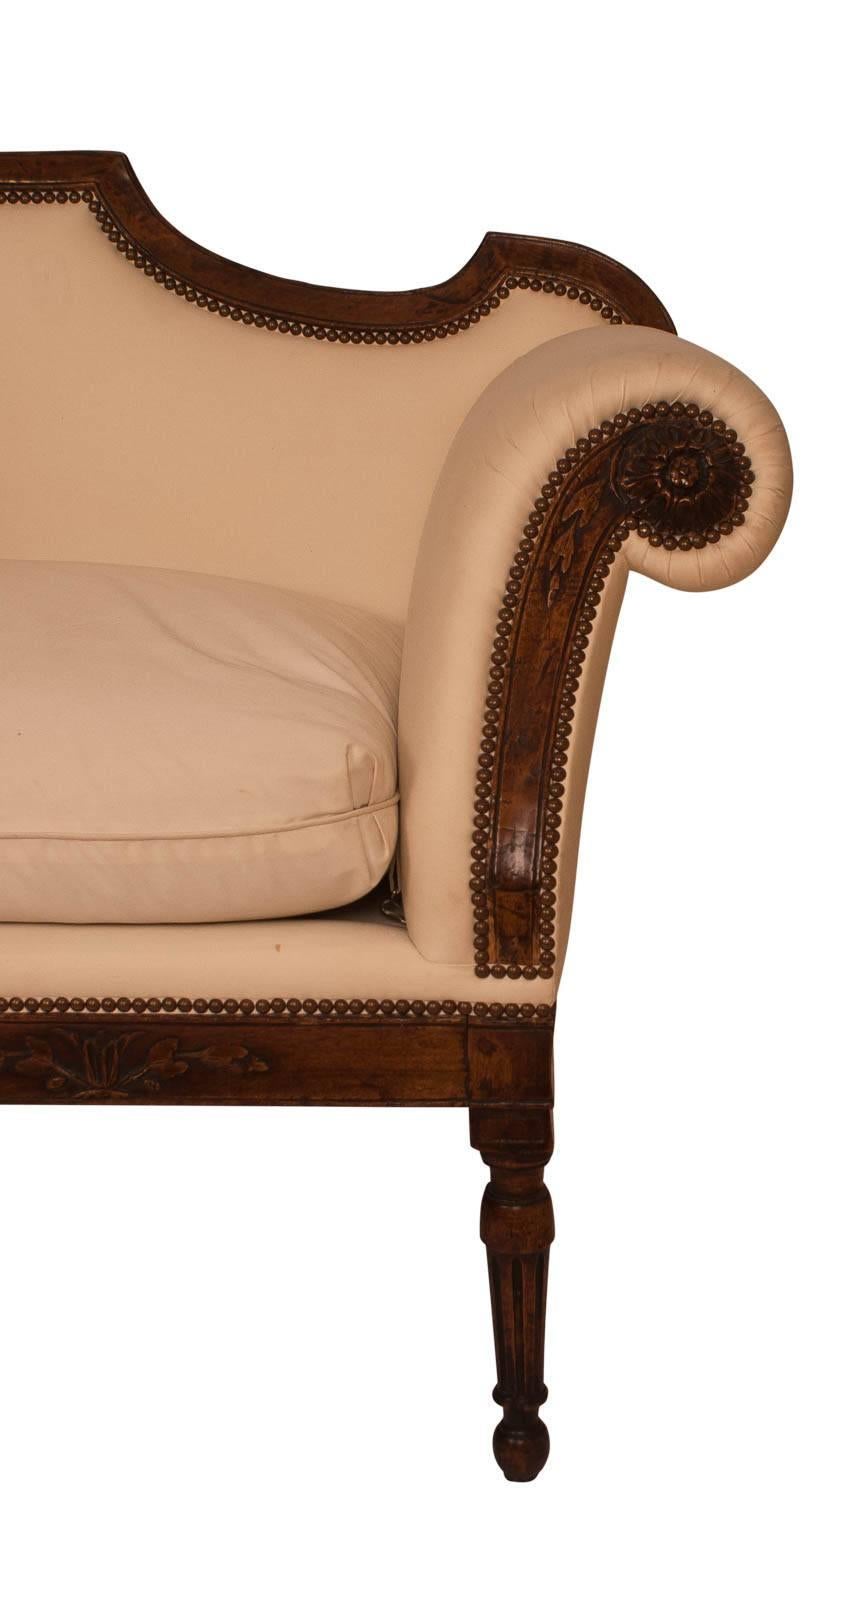 A beautiful neoclassical walnut Italian sofa or settee circa 1810.  Wonderful carved details.  The rosettes and garlands that decorate the front of the piece are very beautiful.  The shaped rail is very nice as are the legs.  The upholstery is in